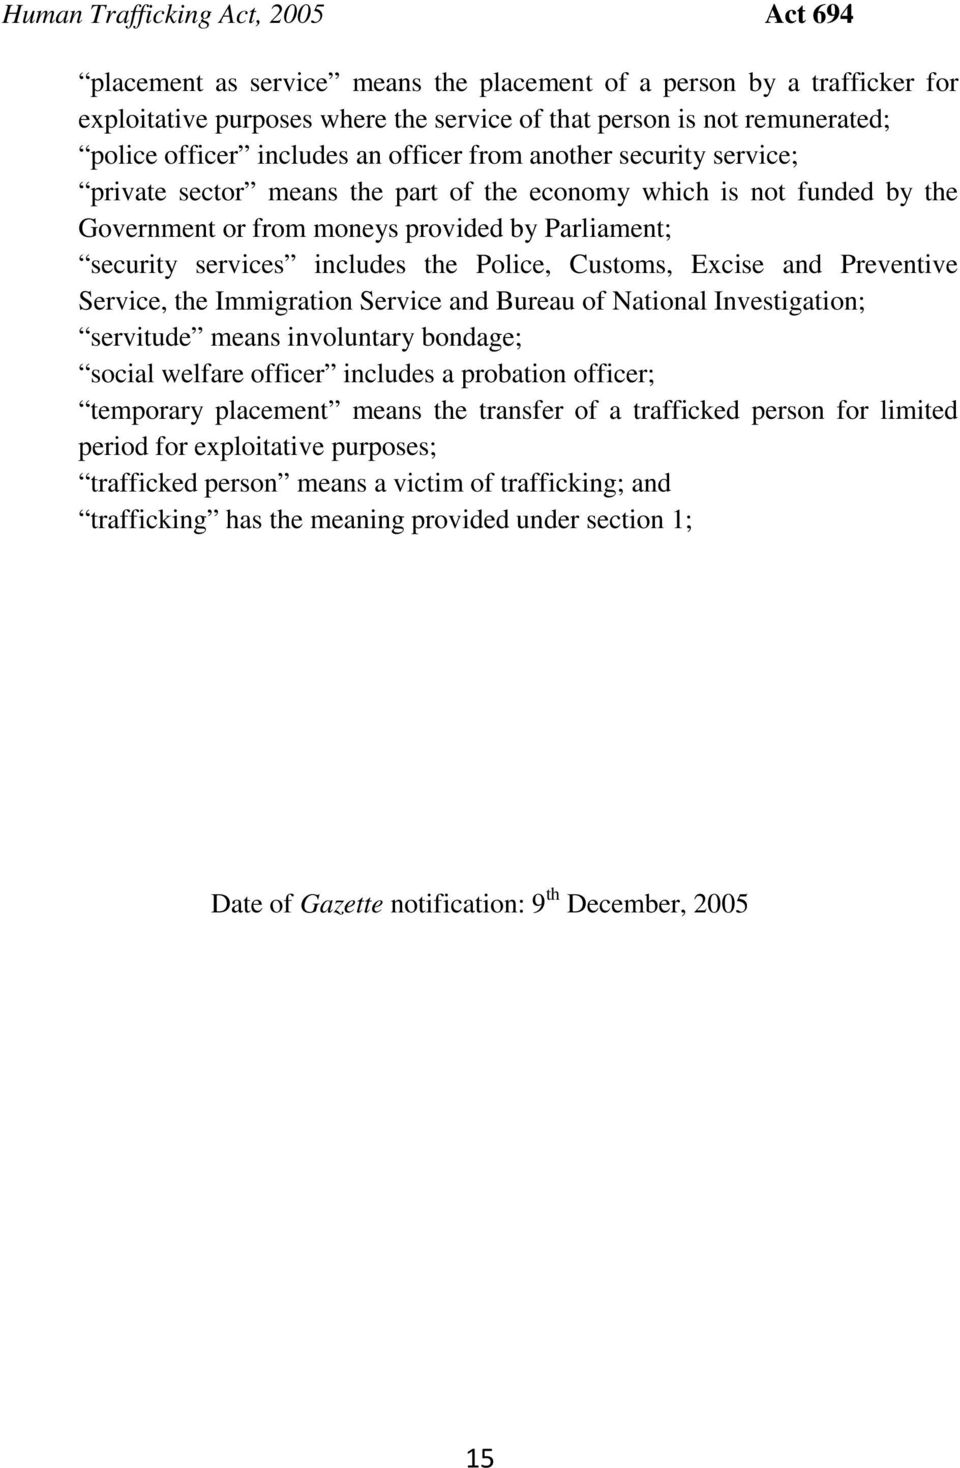 the Police, Customs, Excise and Preventive Service, the Immigration Service and Bureau of National Investigation; servitude means involuntary bondage; social welfare officer includes a probation